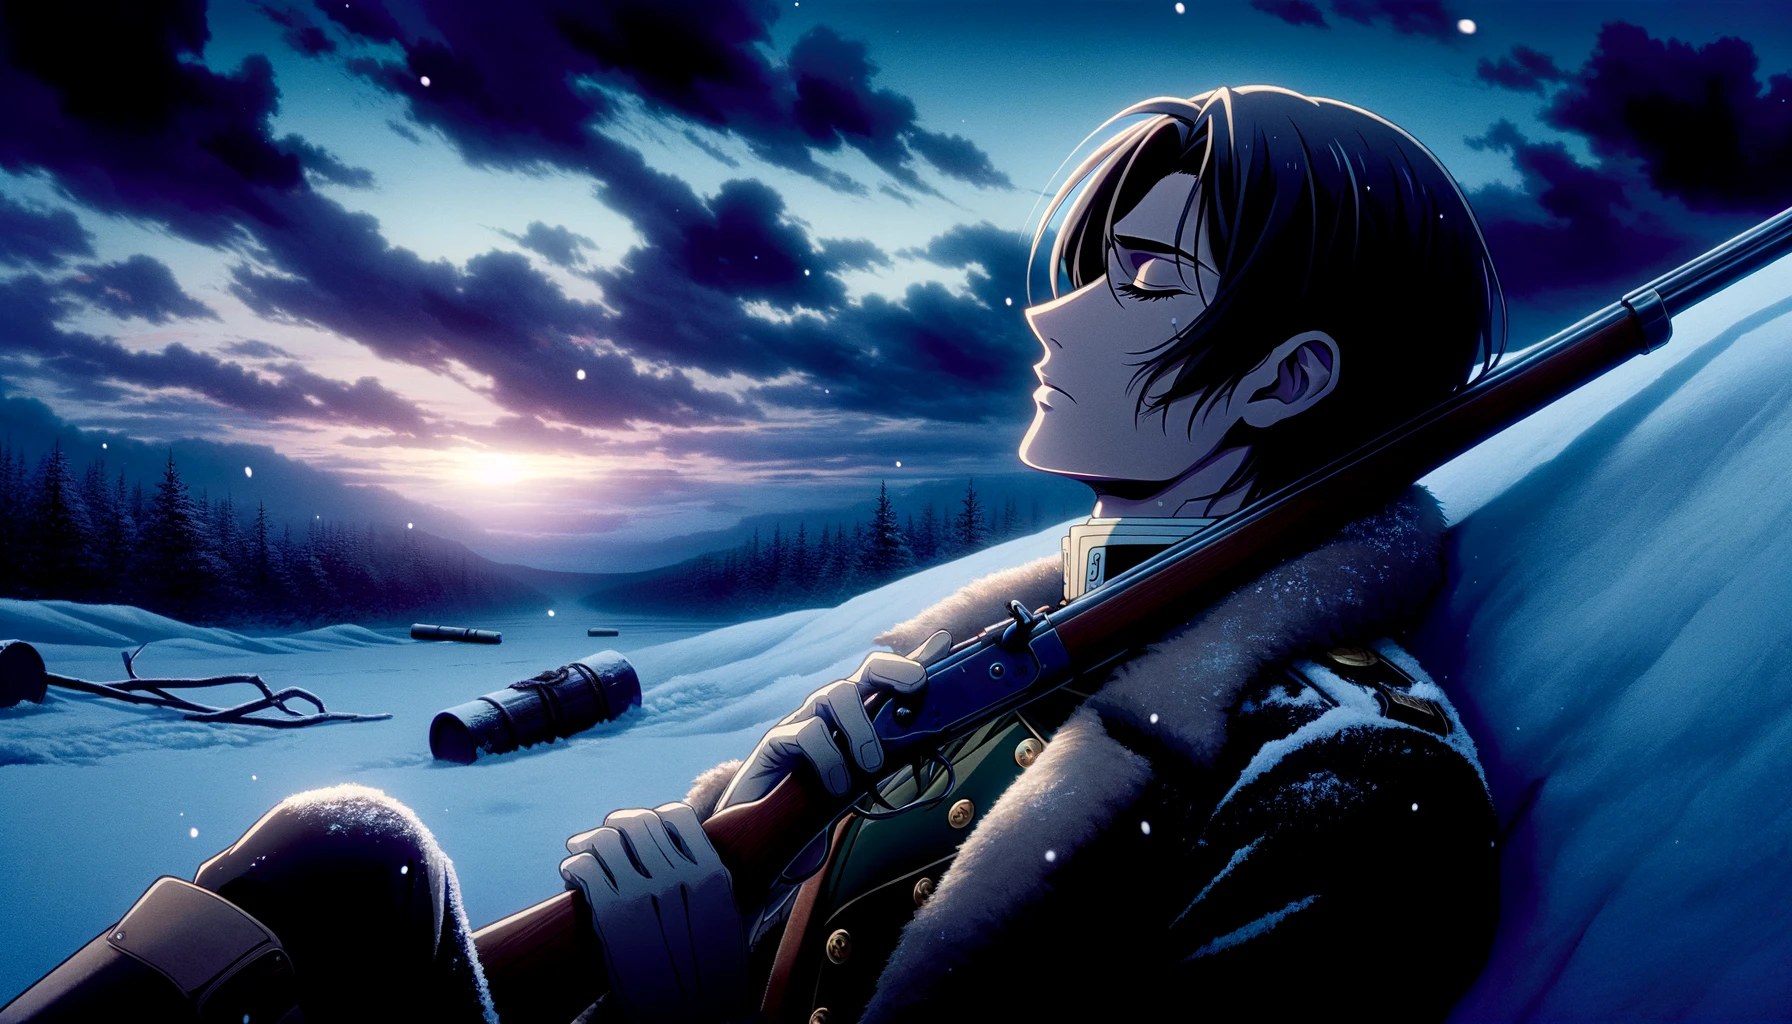 A dramatic anime-style image of a male character inspired by Hyakunosuke Ogata from 'Golden Kamuy', depicting his final moments. The scene is set in a snowy, desolate landscape at twilight, with the character lying on the ground, clutching a rifle. His expression is serene yet poignant, capturing a sense of finality and resolution. The sky is a mix of dark blues and purples, enhancing the somber mood of the scene.